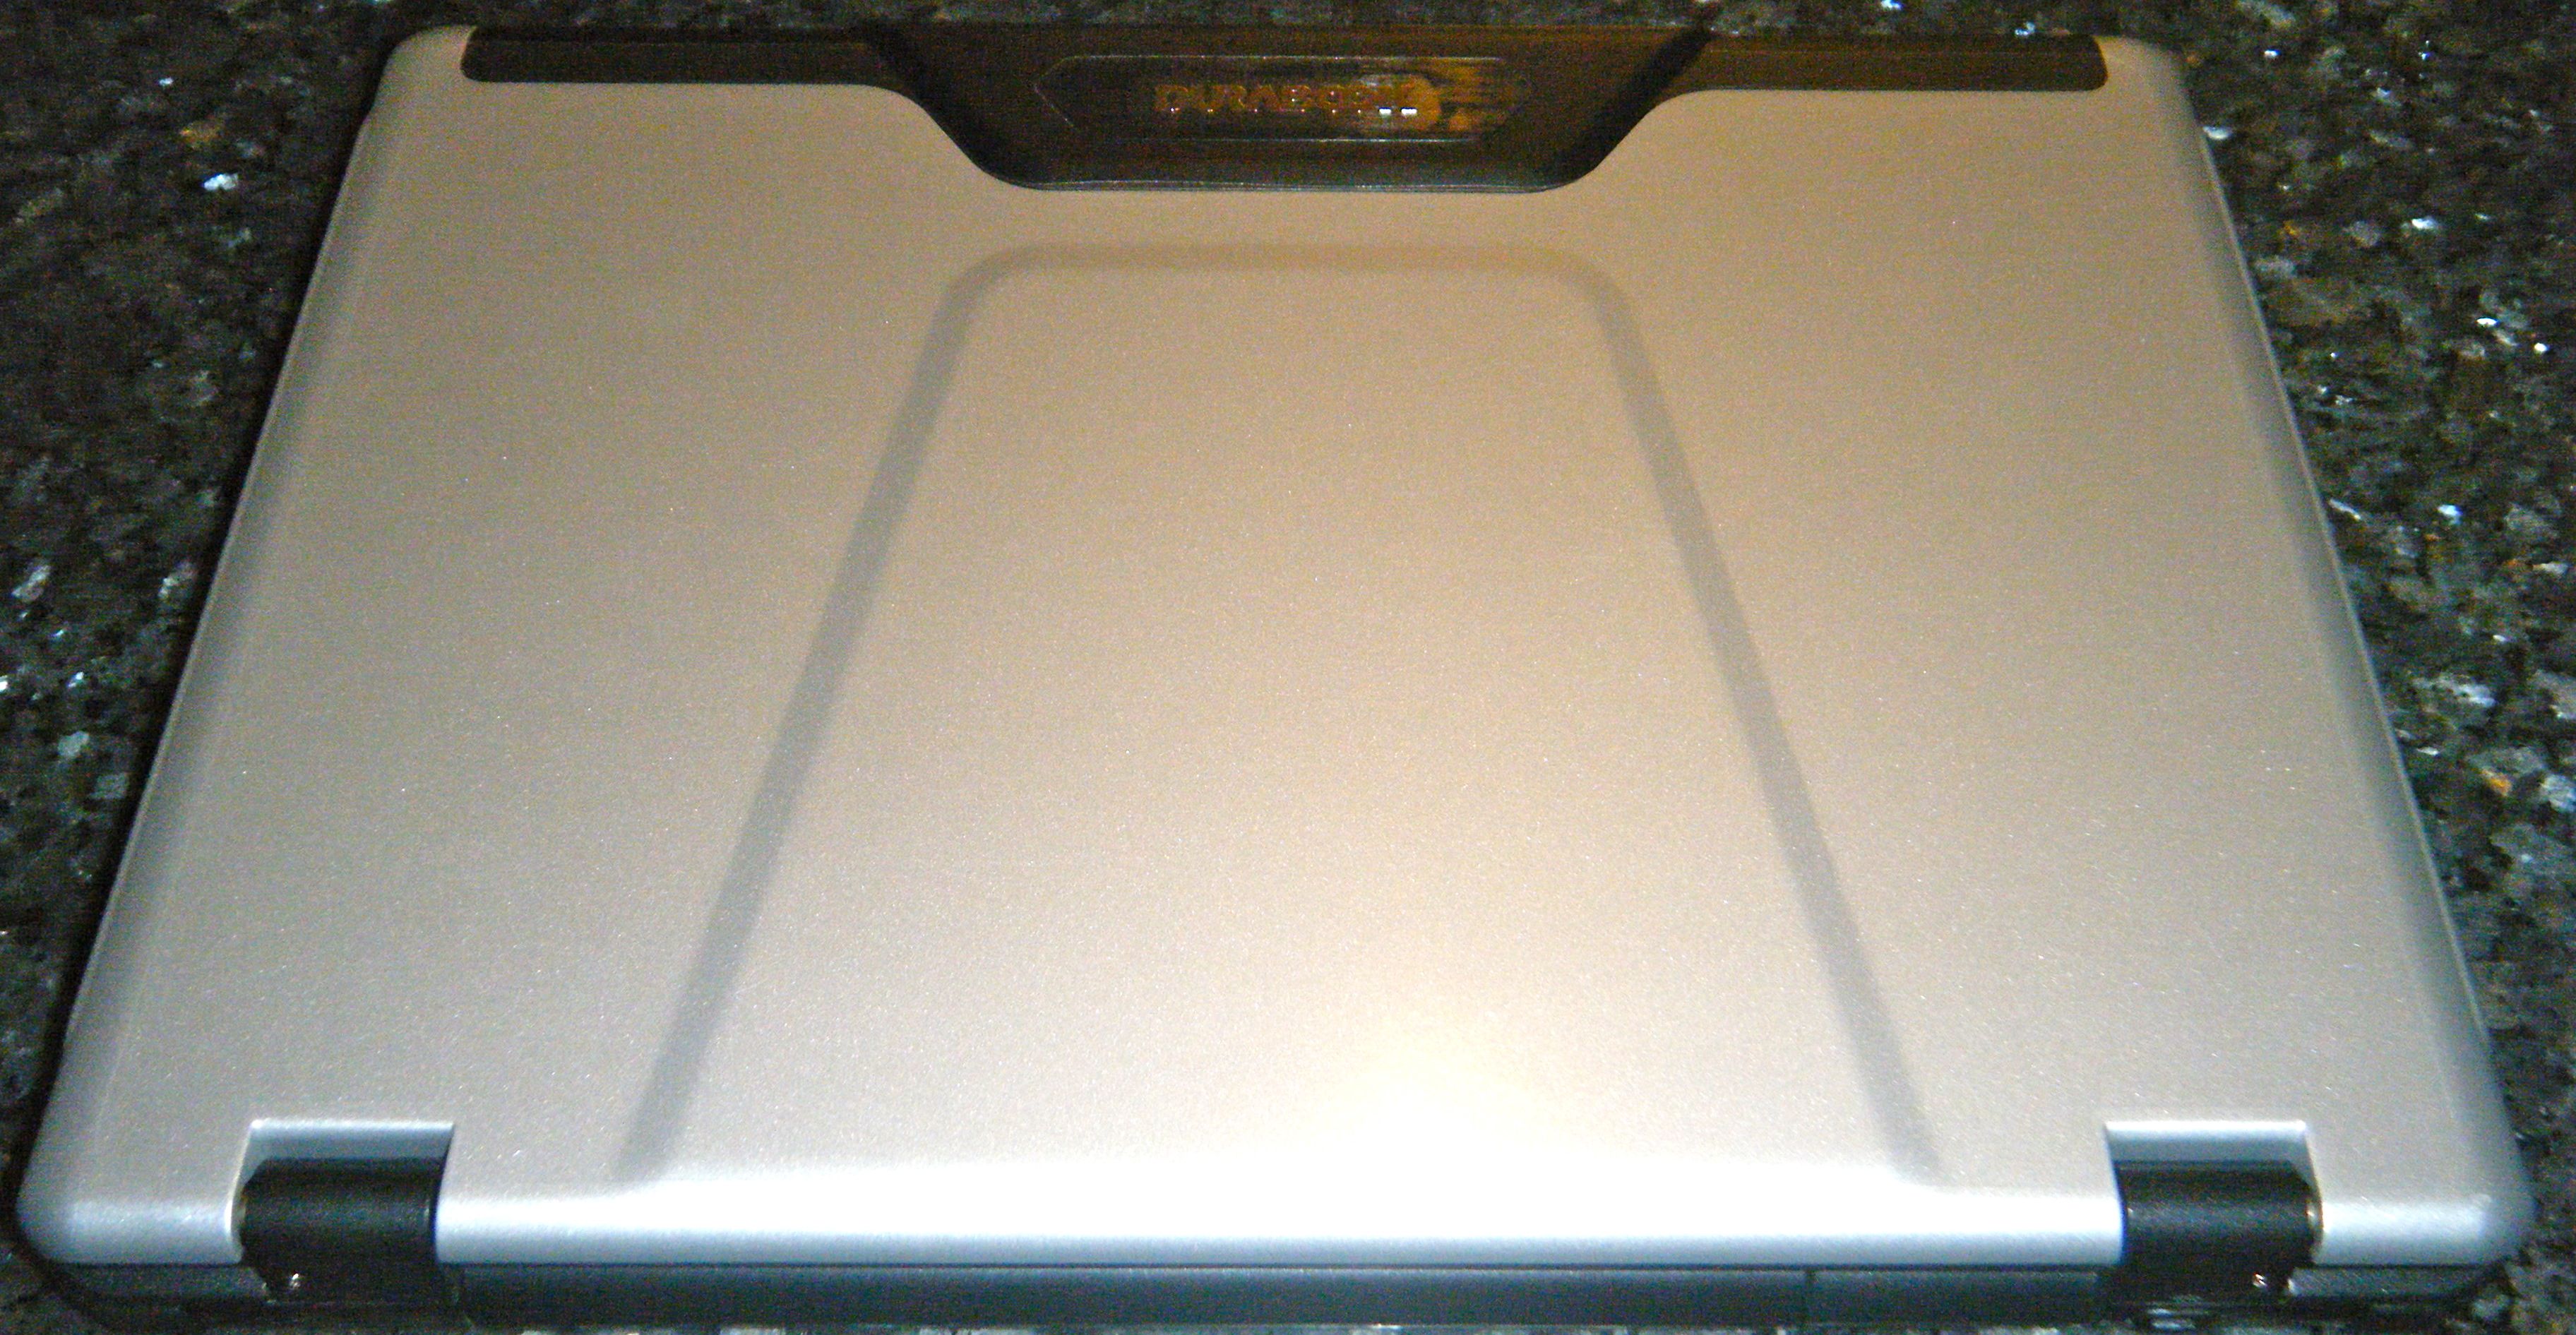 The GammaTech Durabook S15C2 Rugged Laptop Review